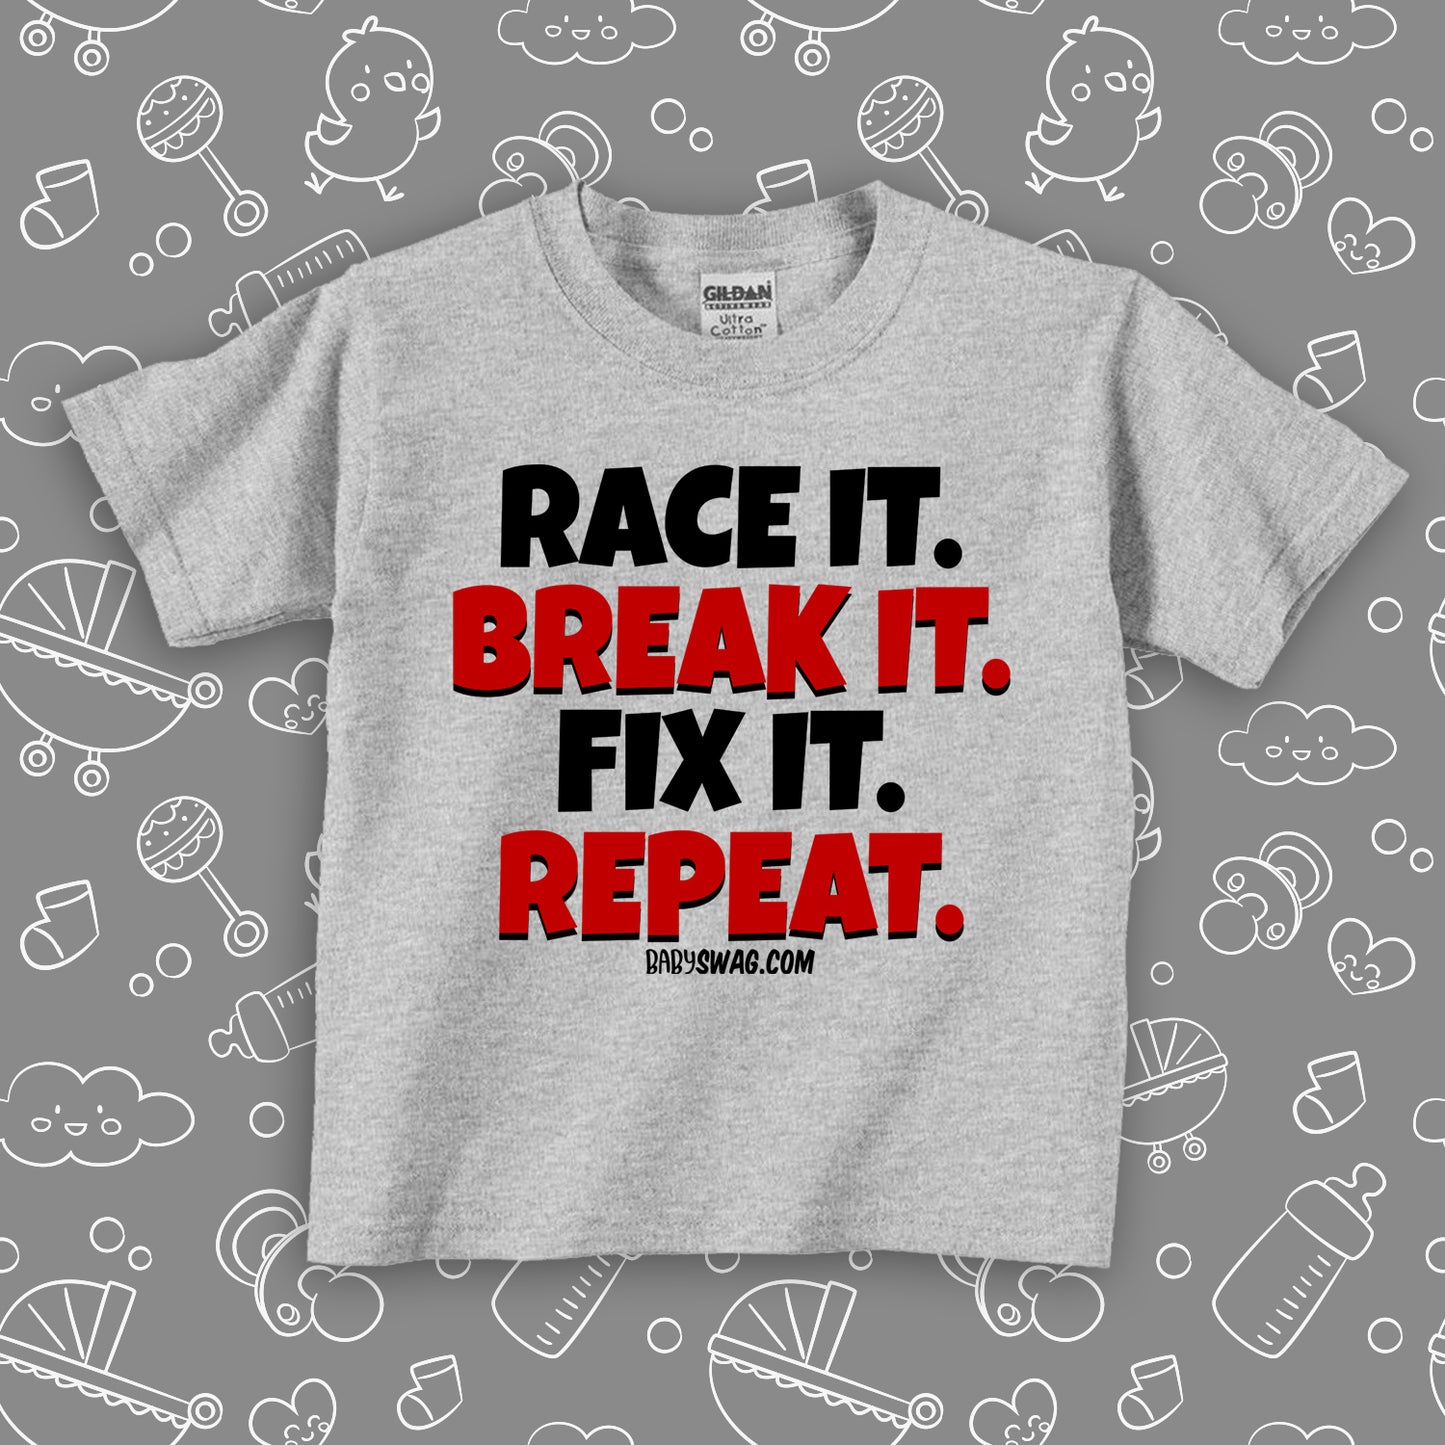 Toddler shirt with saying "race It. Break It. Fix It. Repeat." in grey.